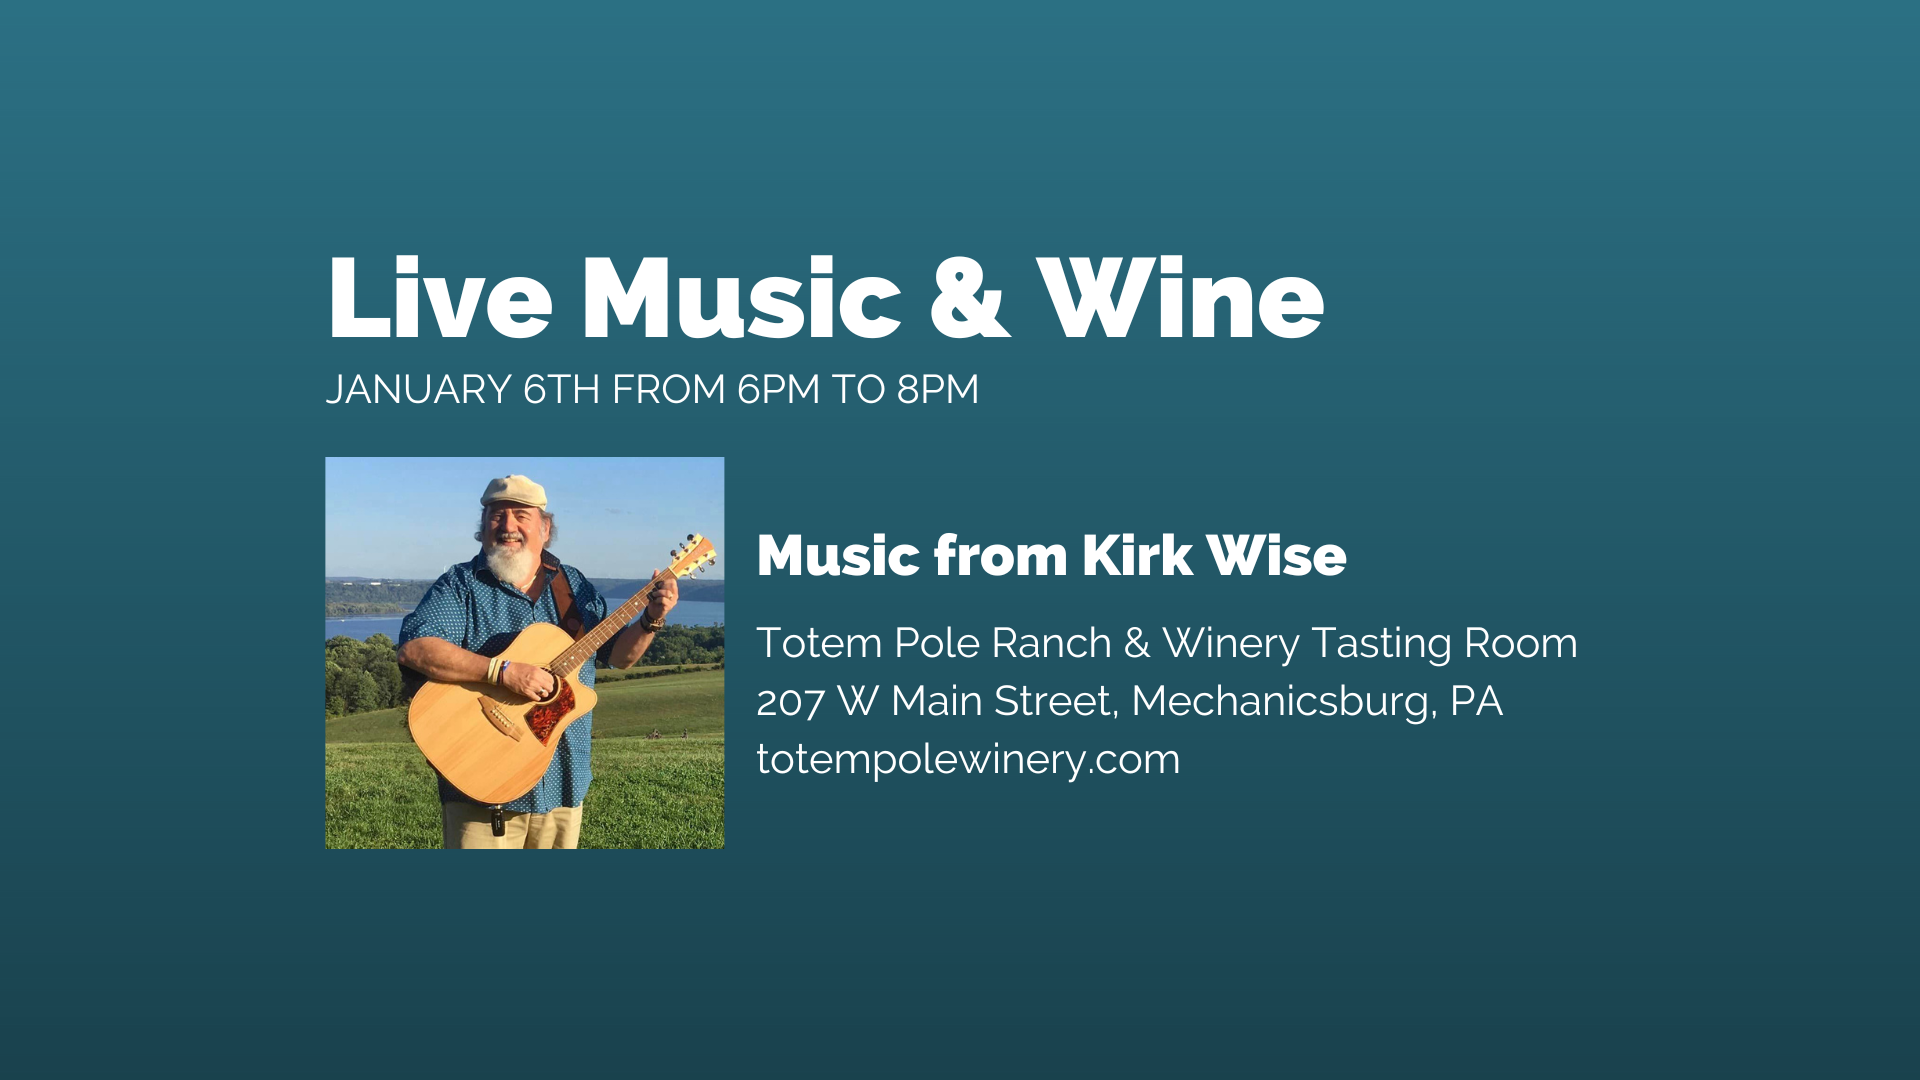 Live Music by kirk wise